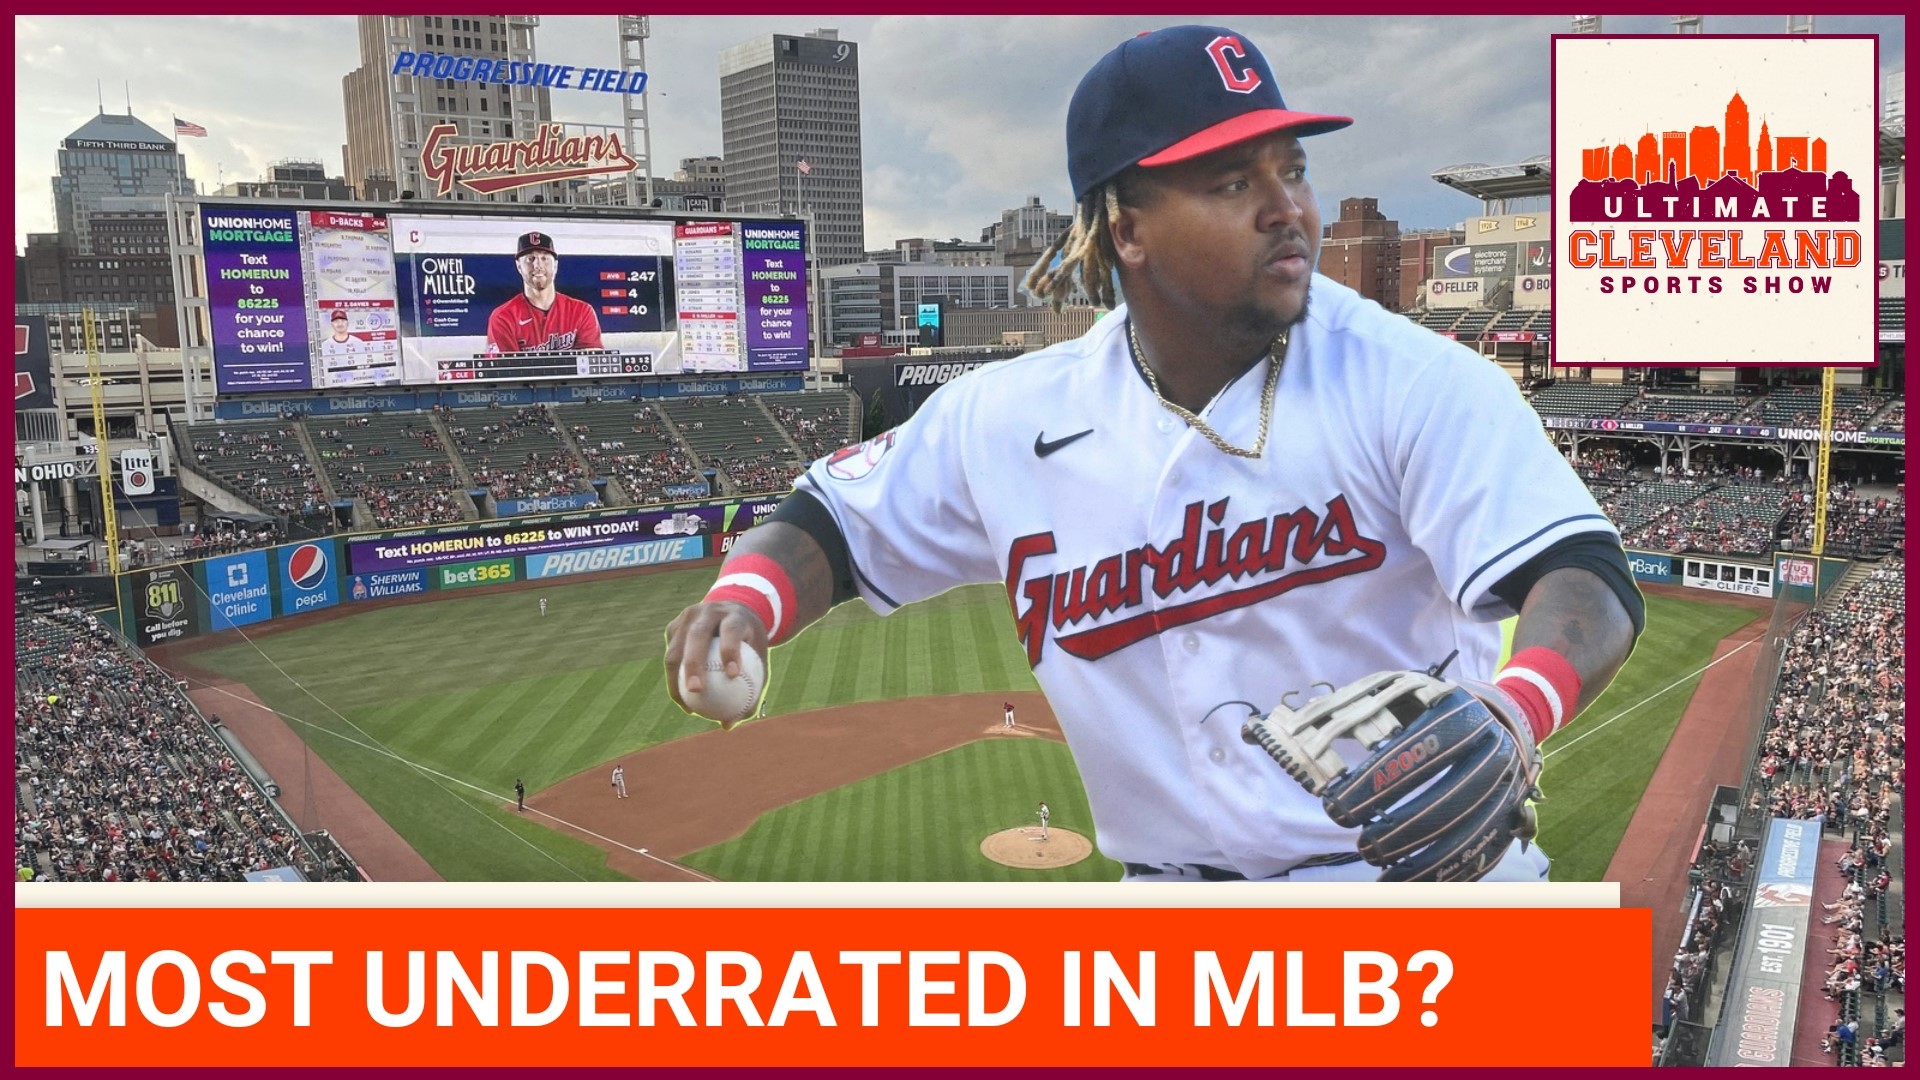 Cleveland Guardians star Jose Ramirez comes in 13th on ESPN's top 100 players list